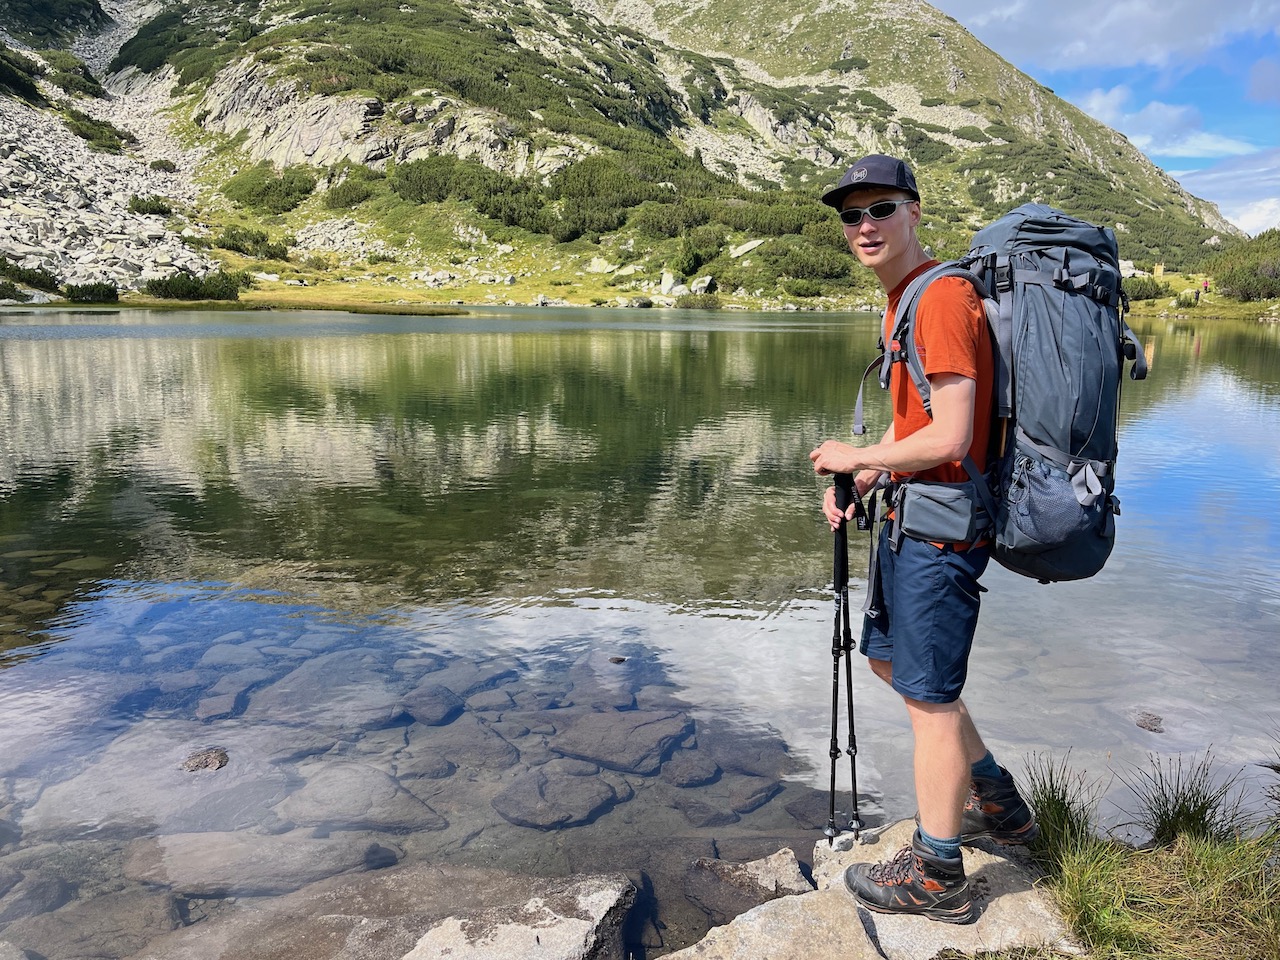 Hiking in the Pirin Mountains